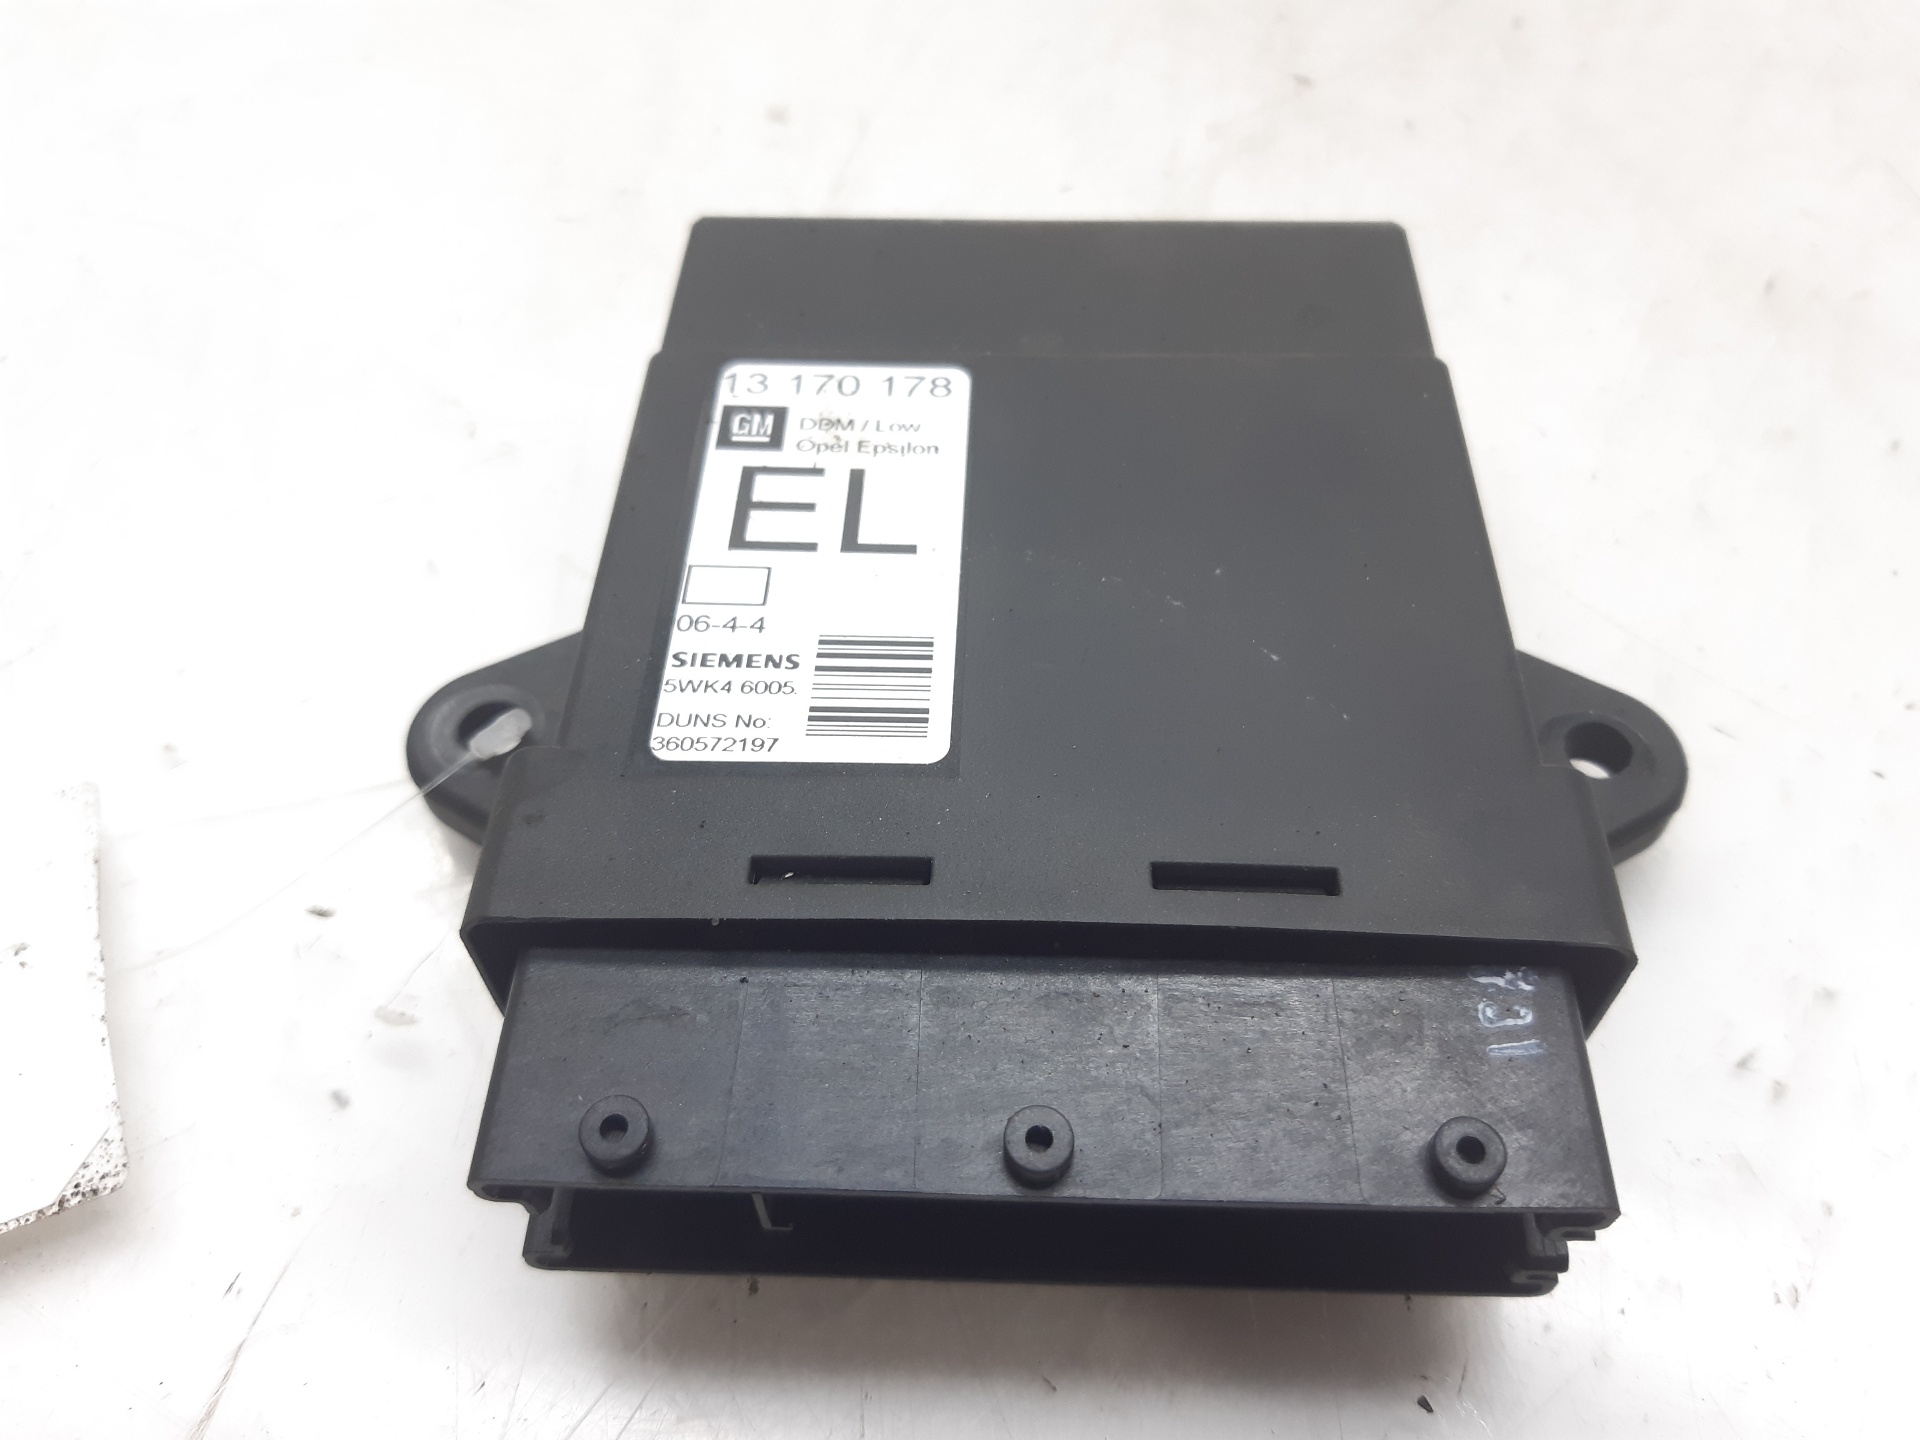 ACURA Vectra C (2002-2005) Other Control Units 13170178 18374116